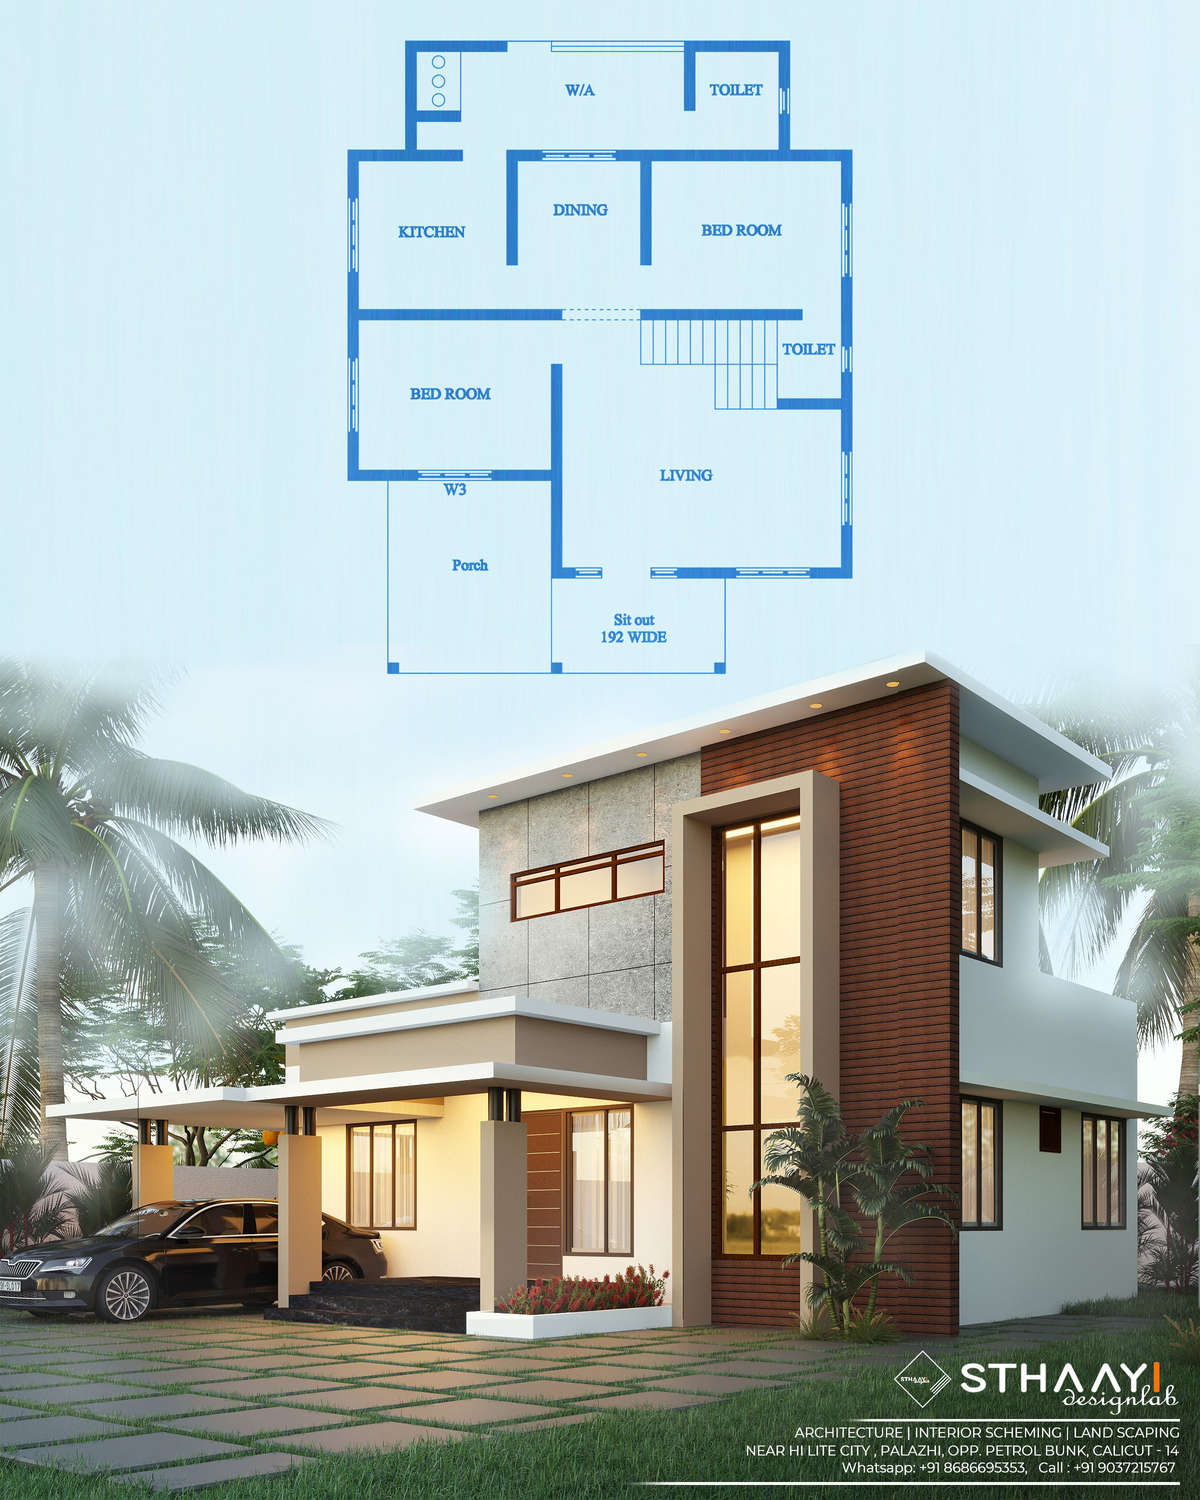 Exterior, Plans Designs by 3D & CAD Fazil sthaayi, Kozhikode | Kolo